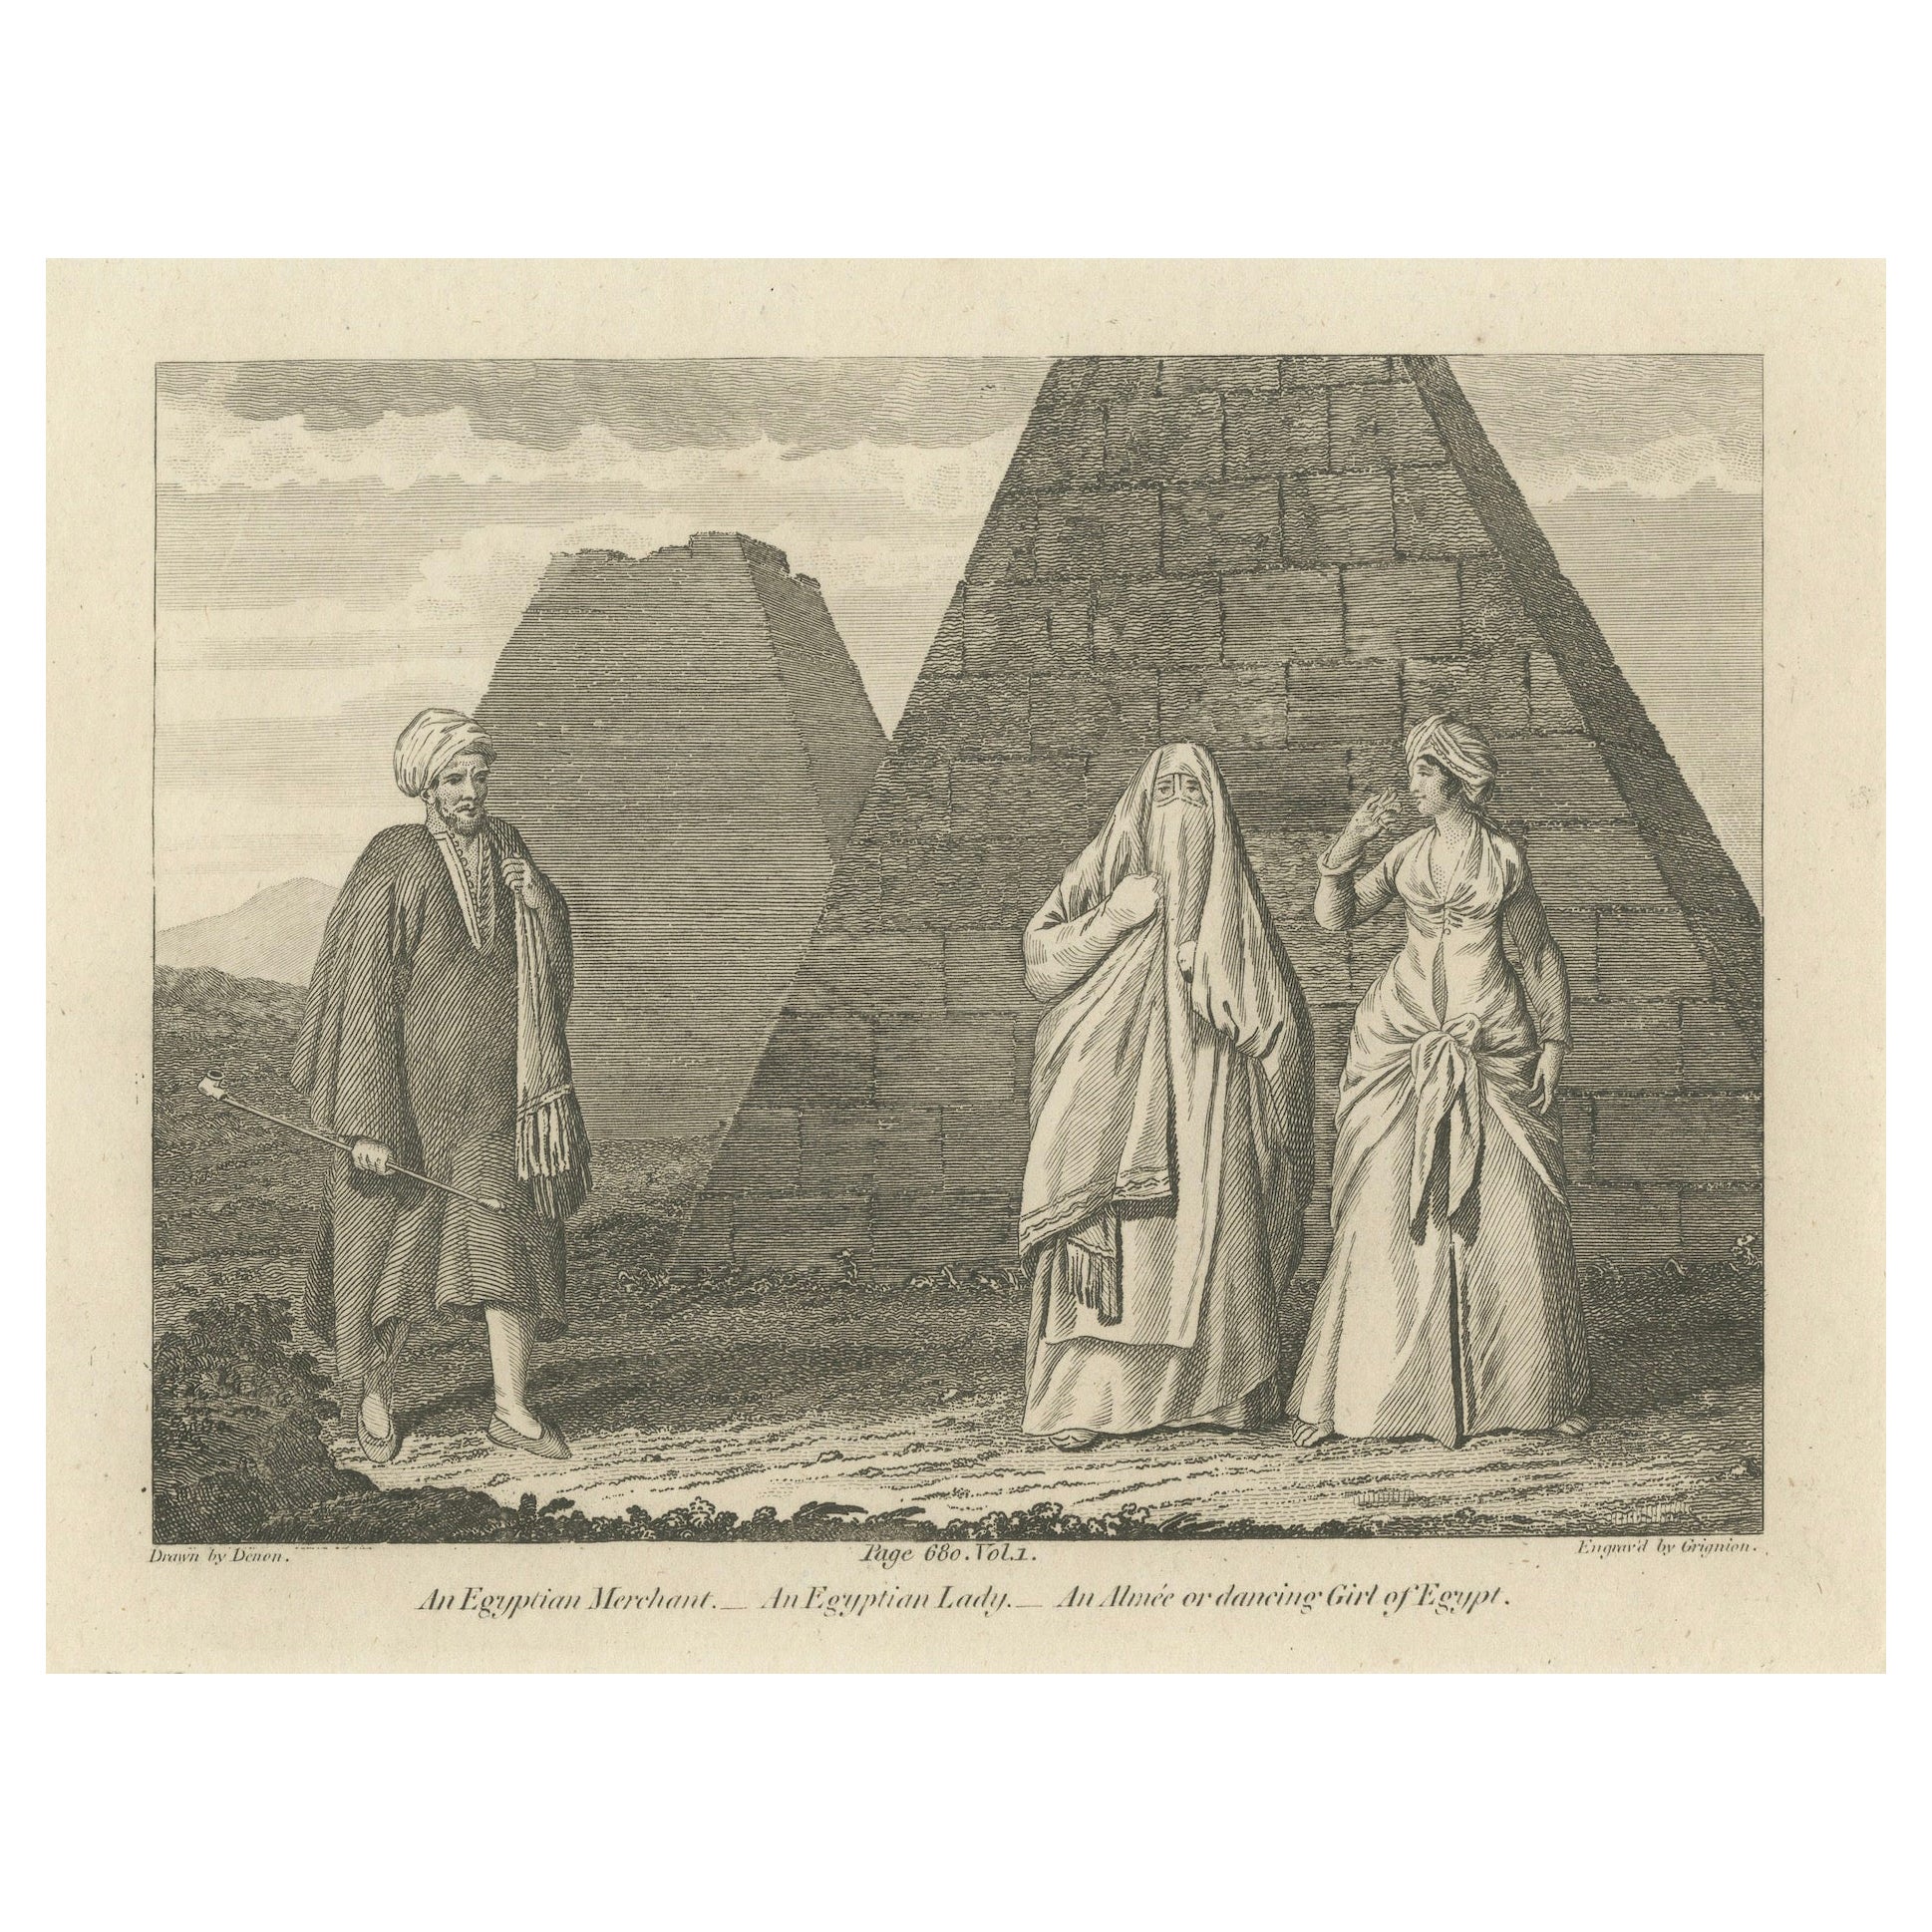 Society of the Nile: Mamluk, Lady, and Almee in Egypt, 1801 For Sale